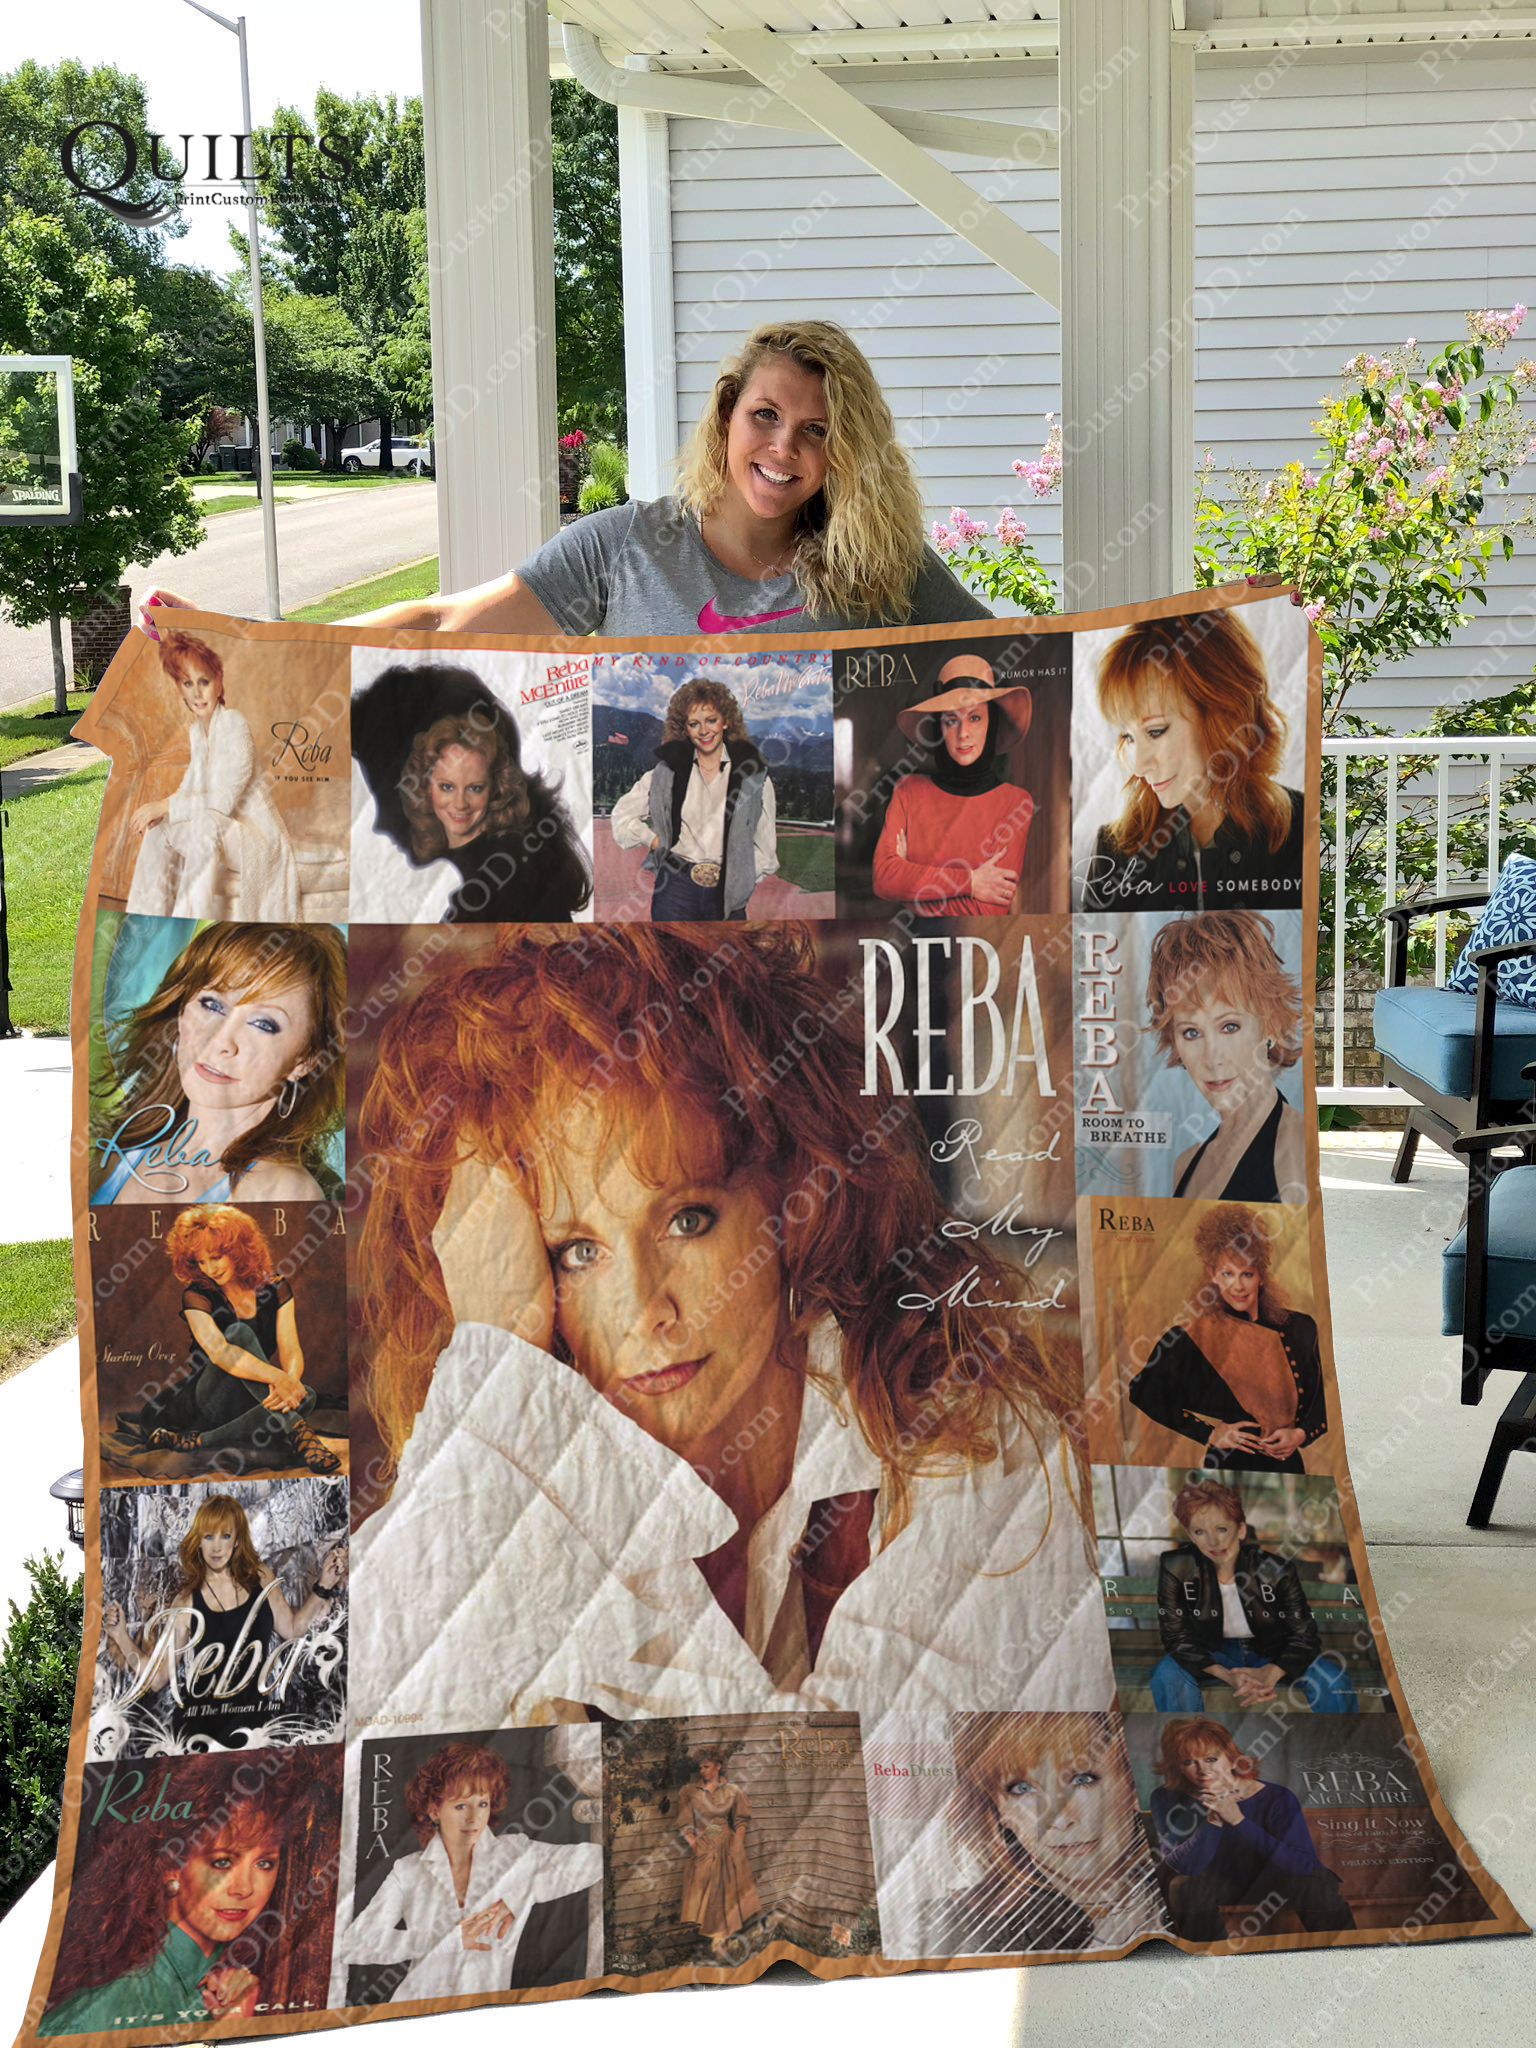 M-reba Mcentire Quilt Blanket For Fans Ver 17 - Featured Quilts